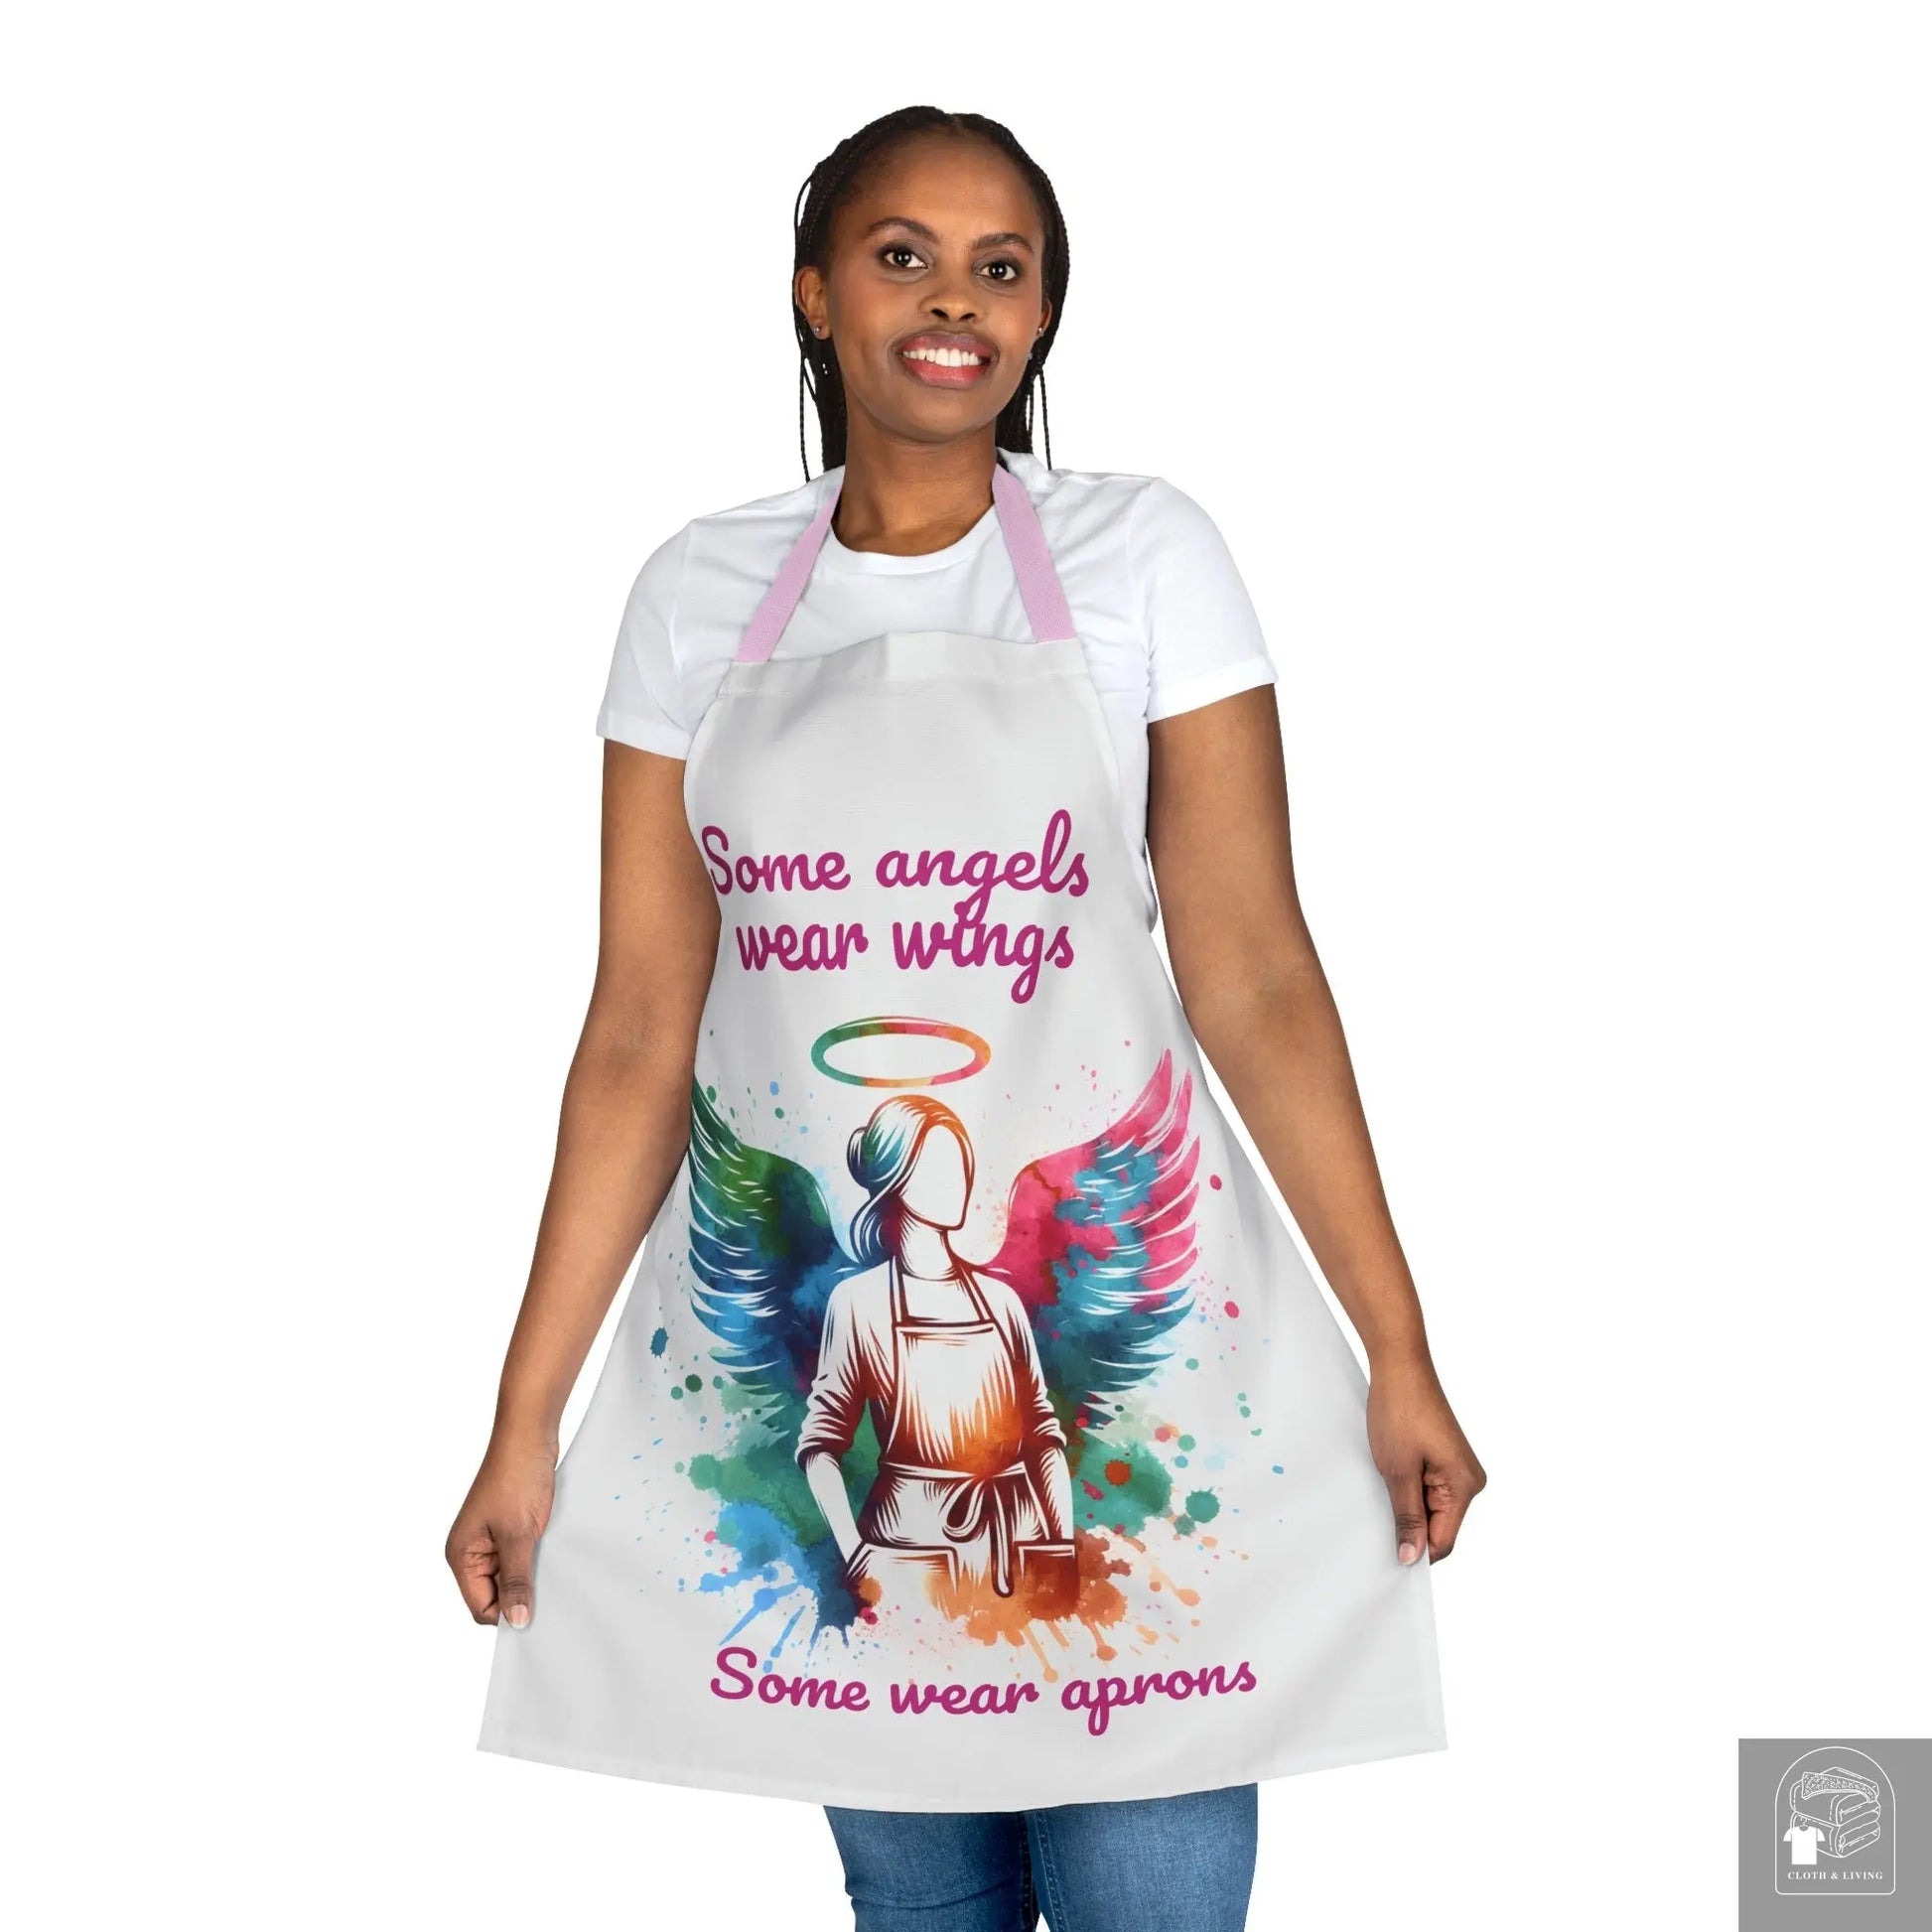 Heaven’s Helpers Apron: Not All Angels Have Wings -   Cloth & Living